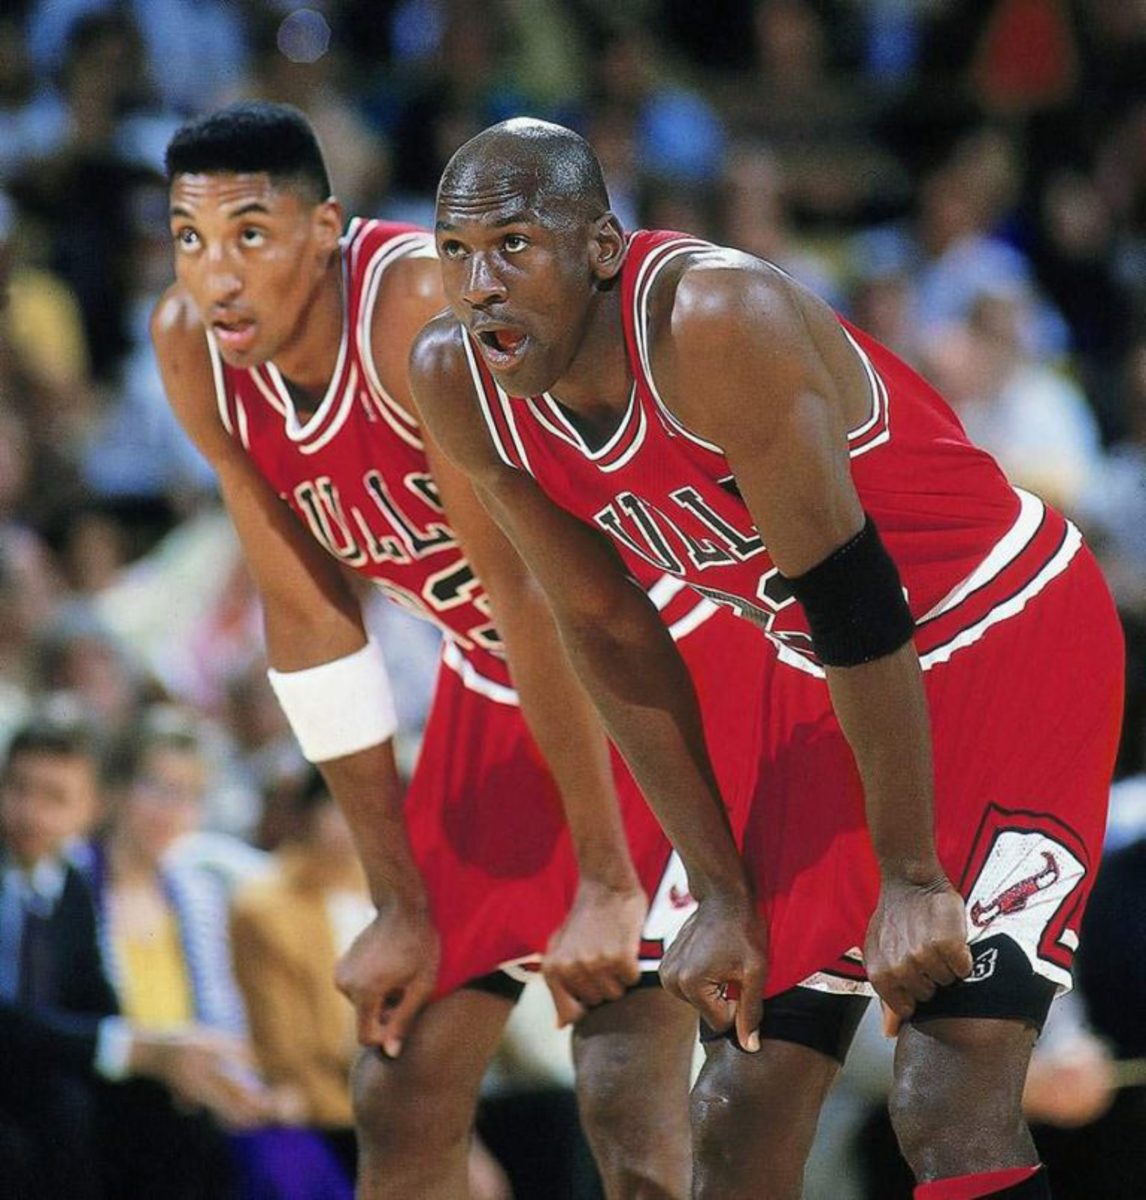 If Pippen Carried Michael Jordan Past His 1-9 Record, Does That Mean Larry Hughes Carried LeBron James To The Playoffs?